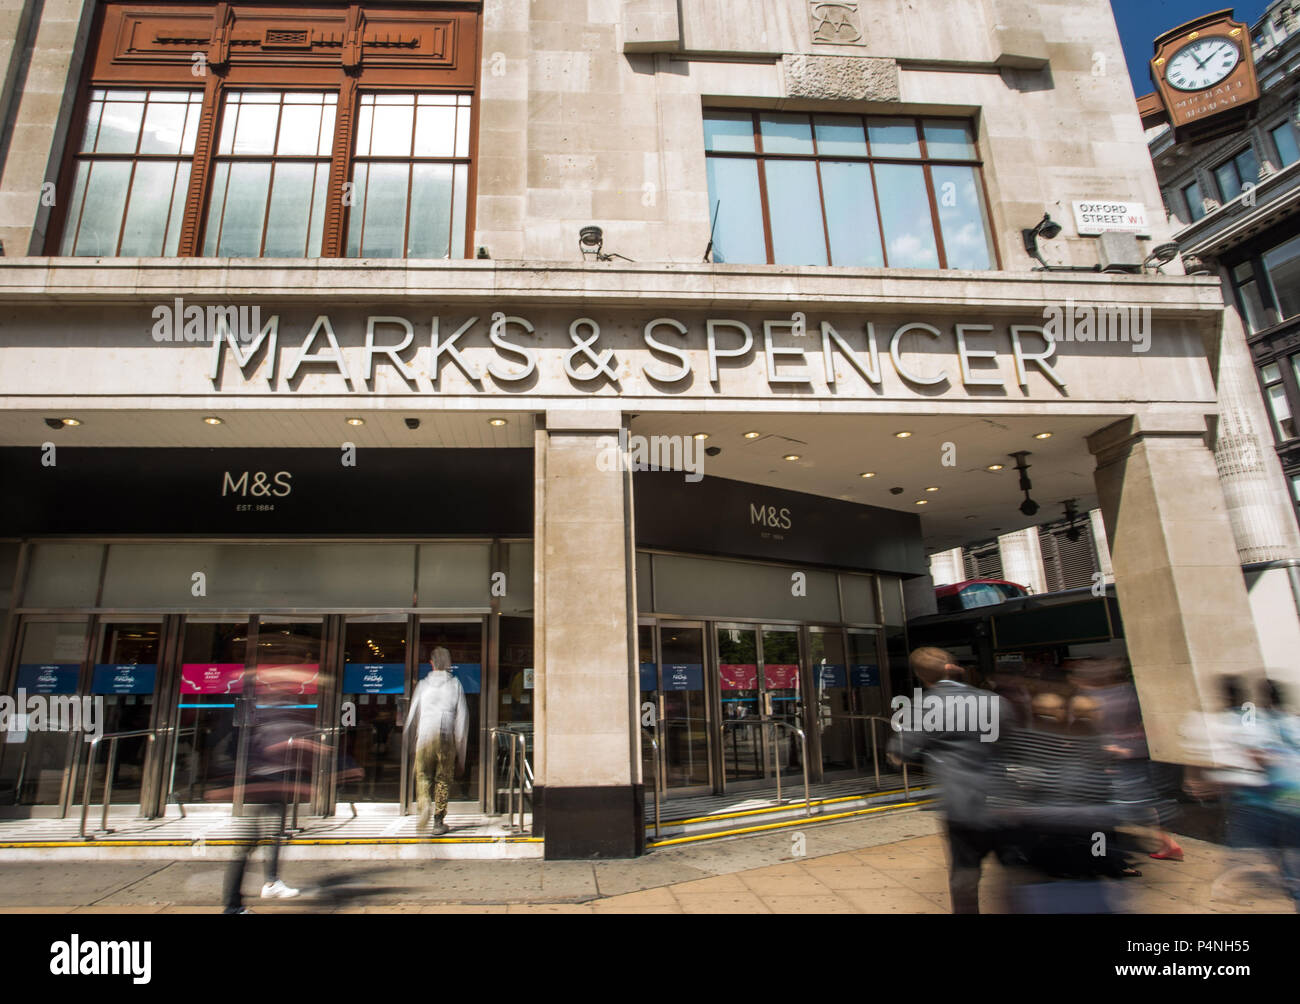 Marks and spencer plan a hi-res stock photography and images - Alamy